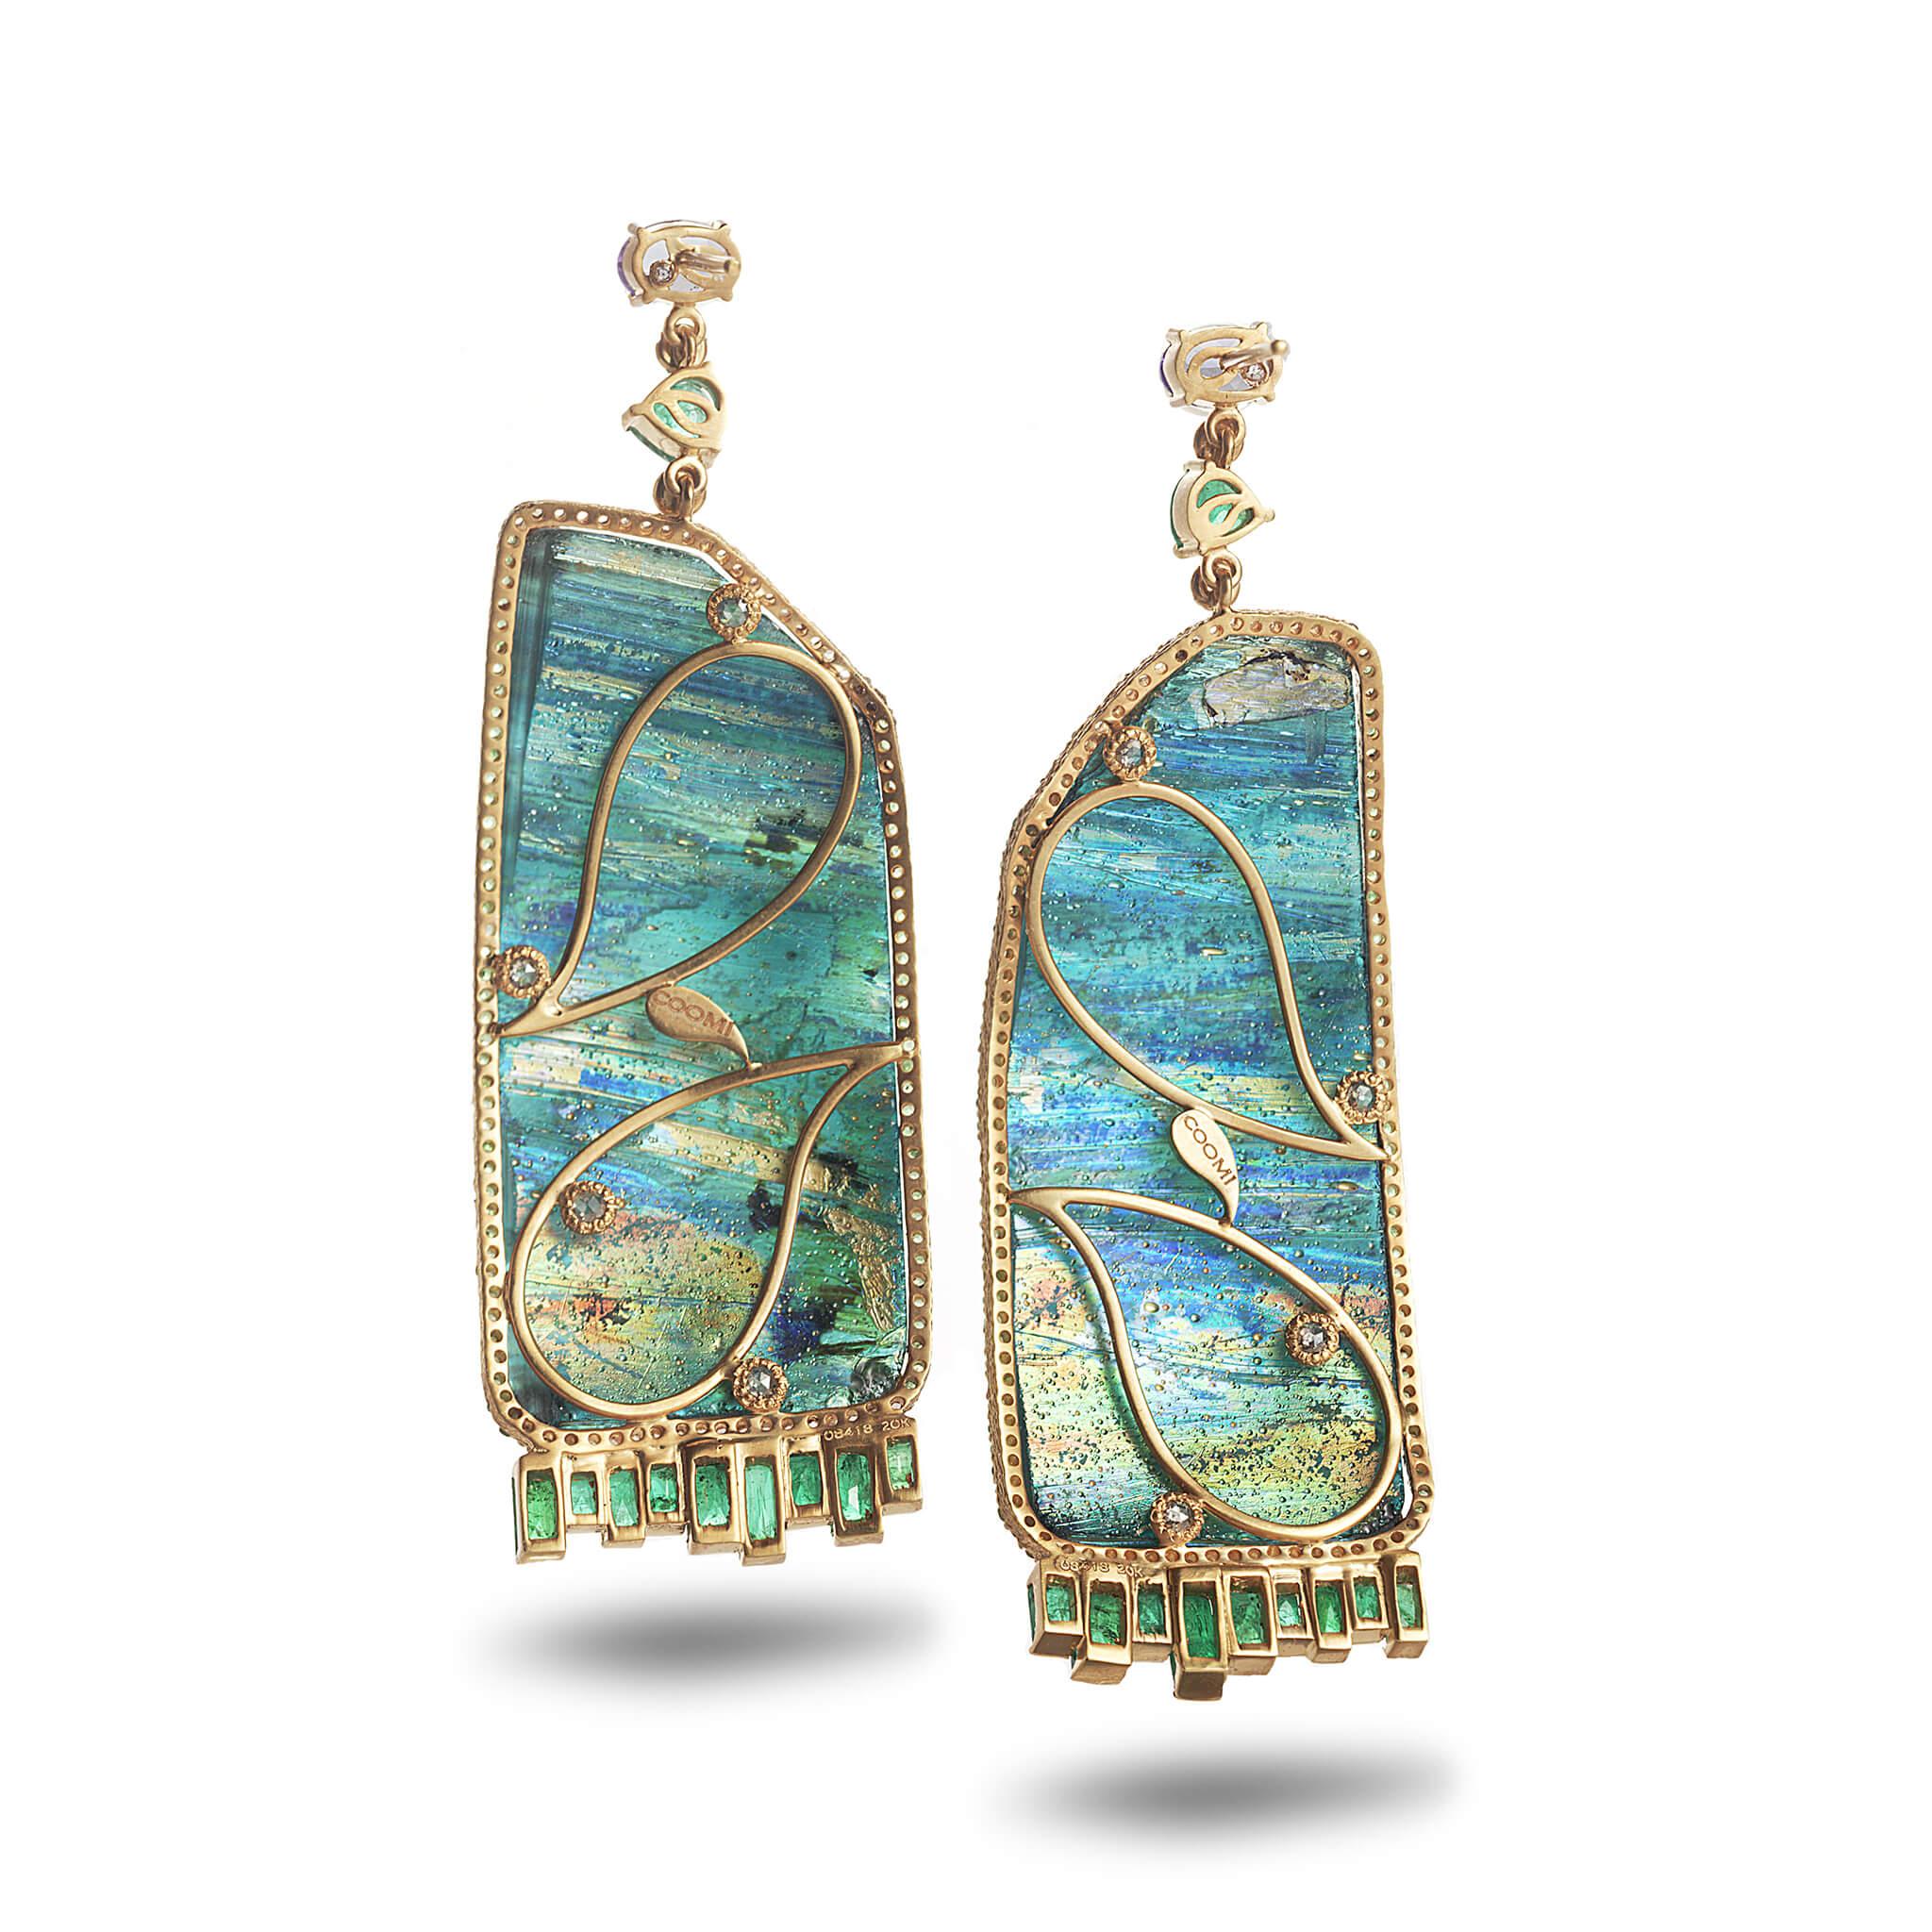 Coomi 20K Gold Ancient Roman Glass 2.67cts Emerald, 1.28cts Tanzanite, 0.88cts Tsavorite, and 0.68cts Diamond Earrings.

Coomi presents her latest addition to the Antiquity collection, Ancient Roman Glass. Each slice of the world’s first handblown